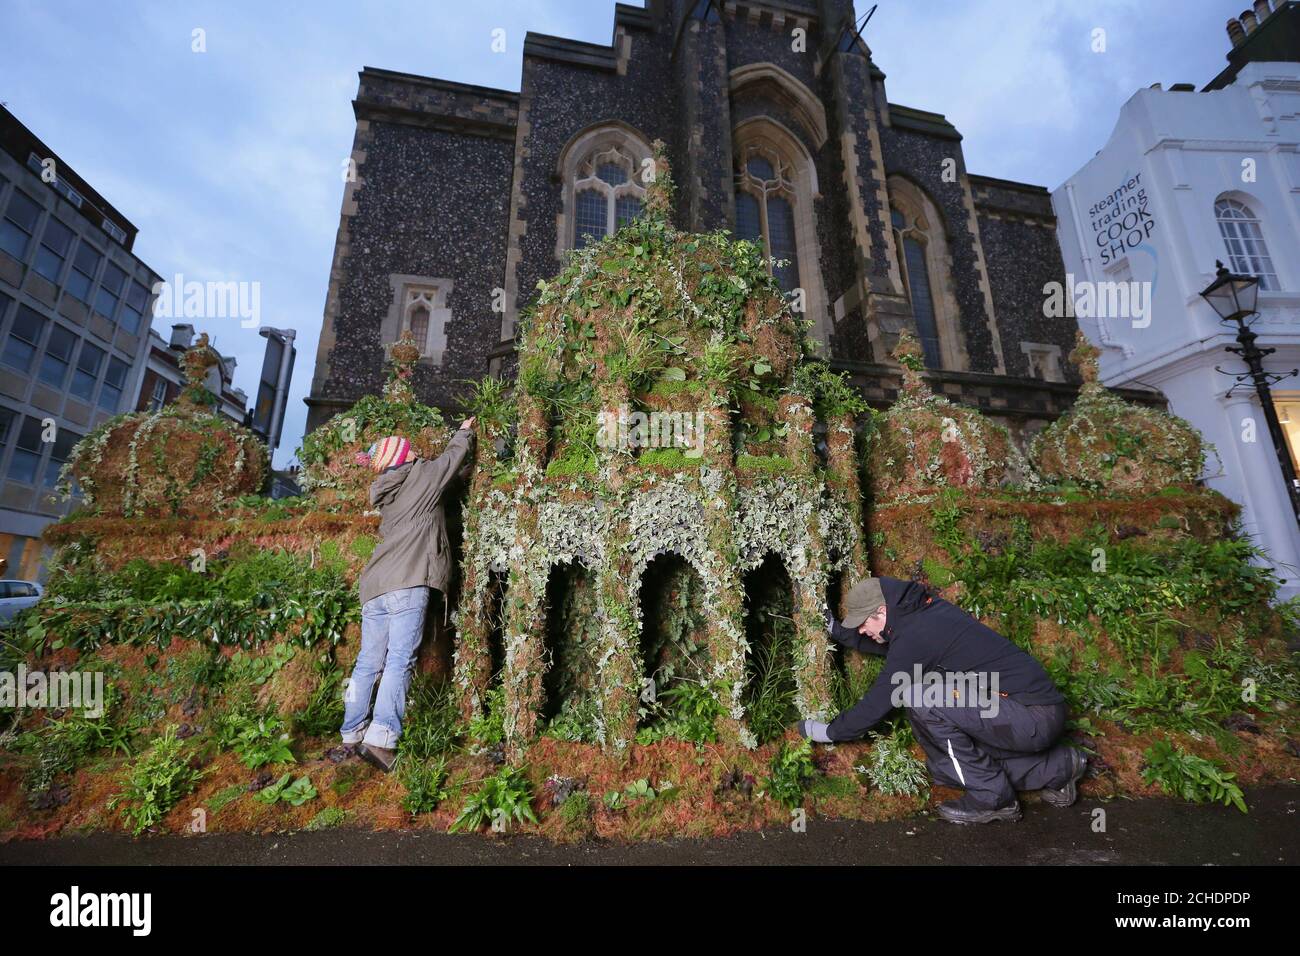 Plant expert,Tomoko O'Reilly (left) and Iain Prendergast put the finishing touches to a 12ft tall replica of the Brighton Pavilion made from plants, created by Seventh Generation and Plantlife on display in Brighton to encourage people to sign an online petition calling on Government to invest more in plant-based solutions to combat climate change. Stock Photo